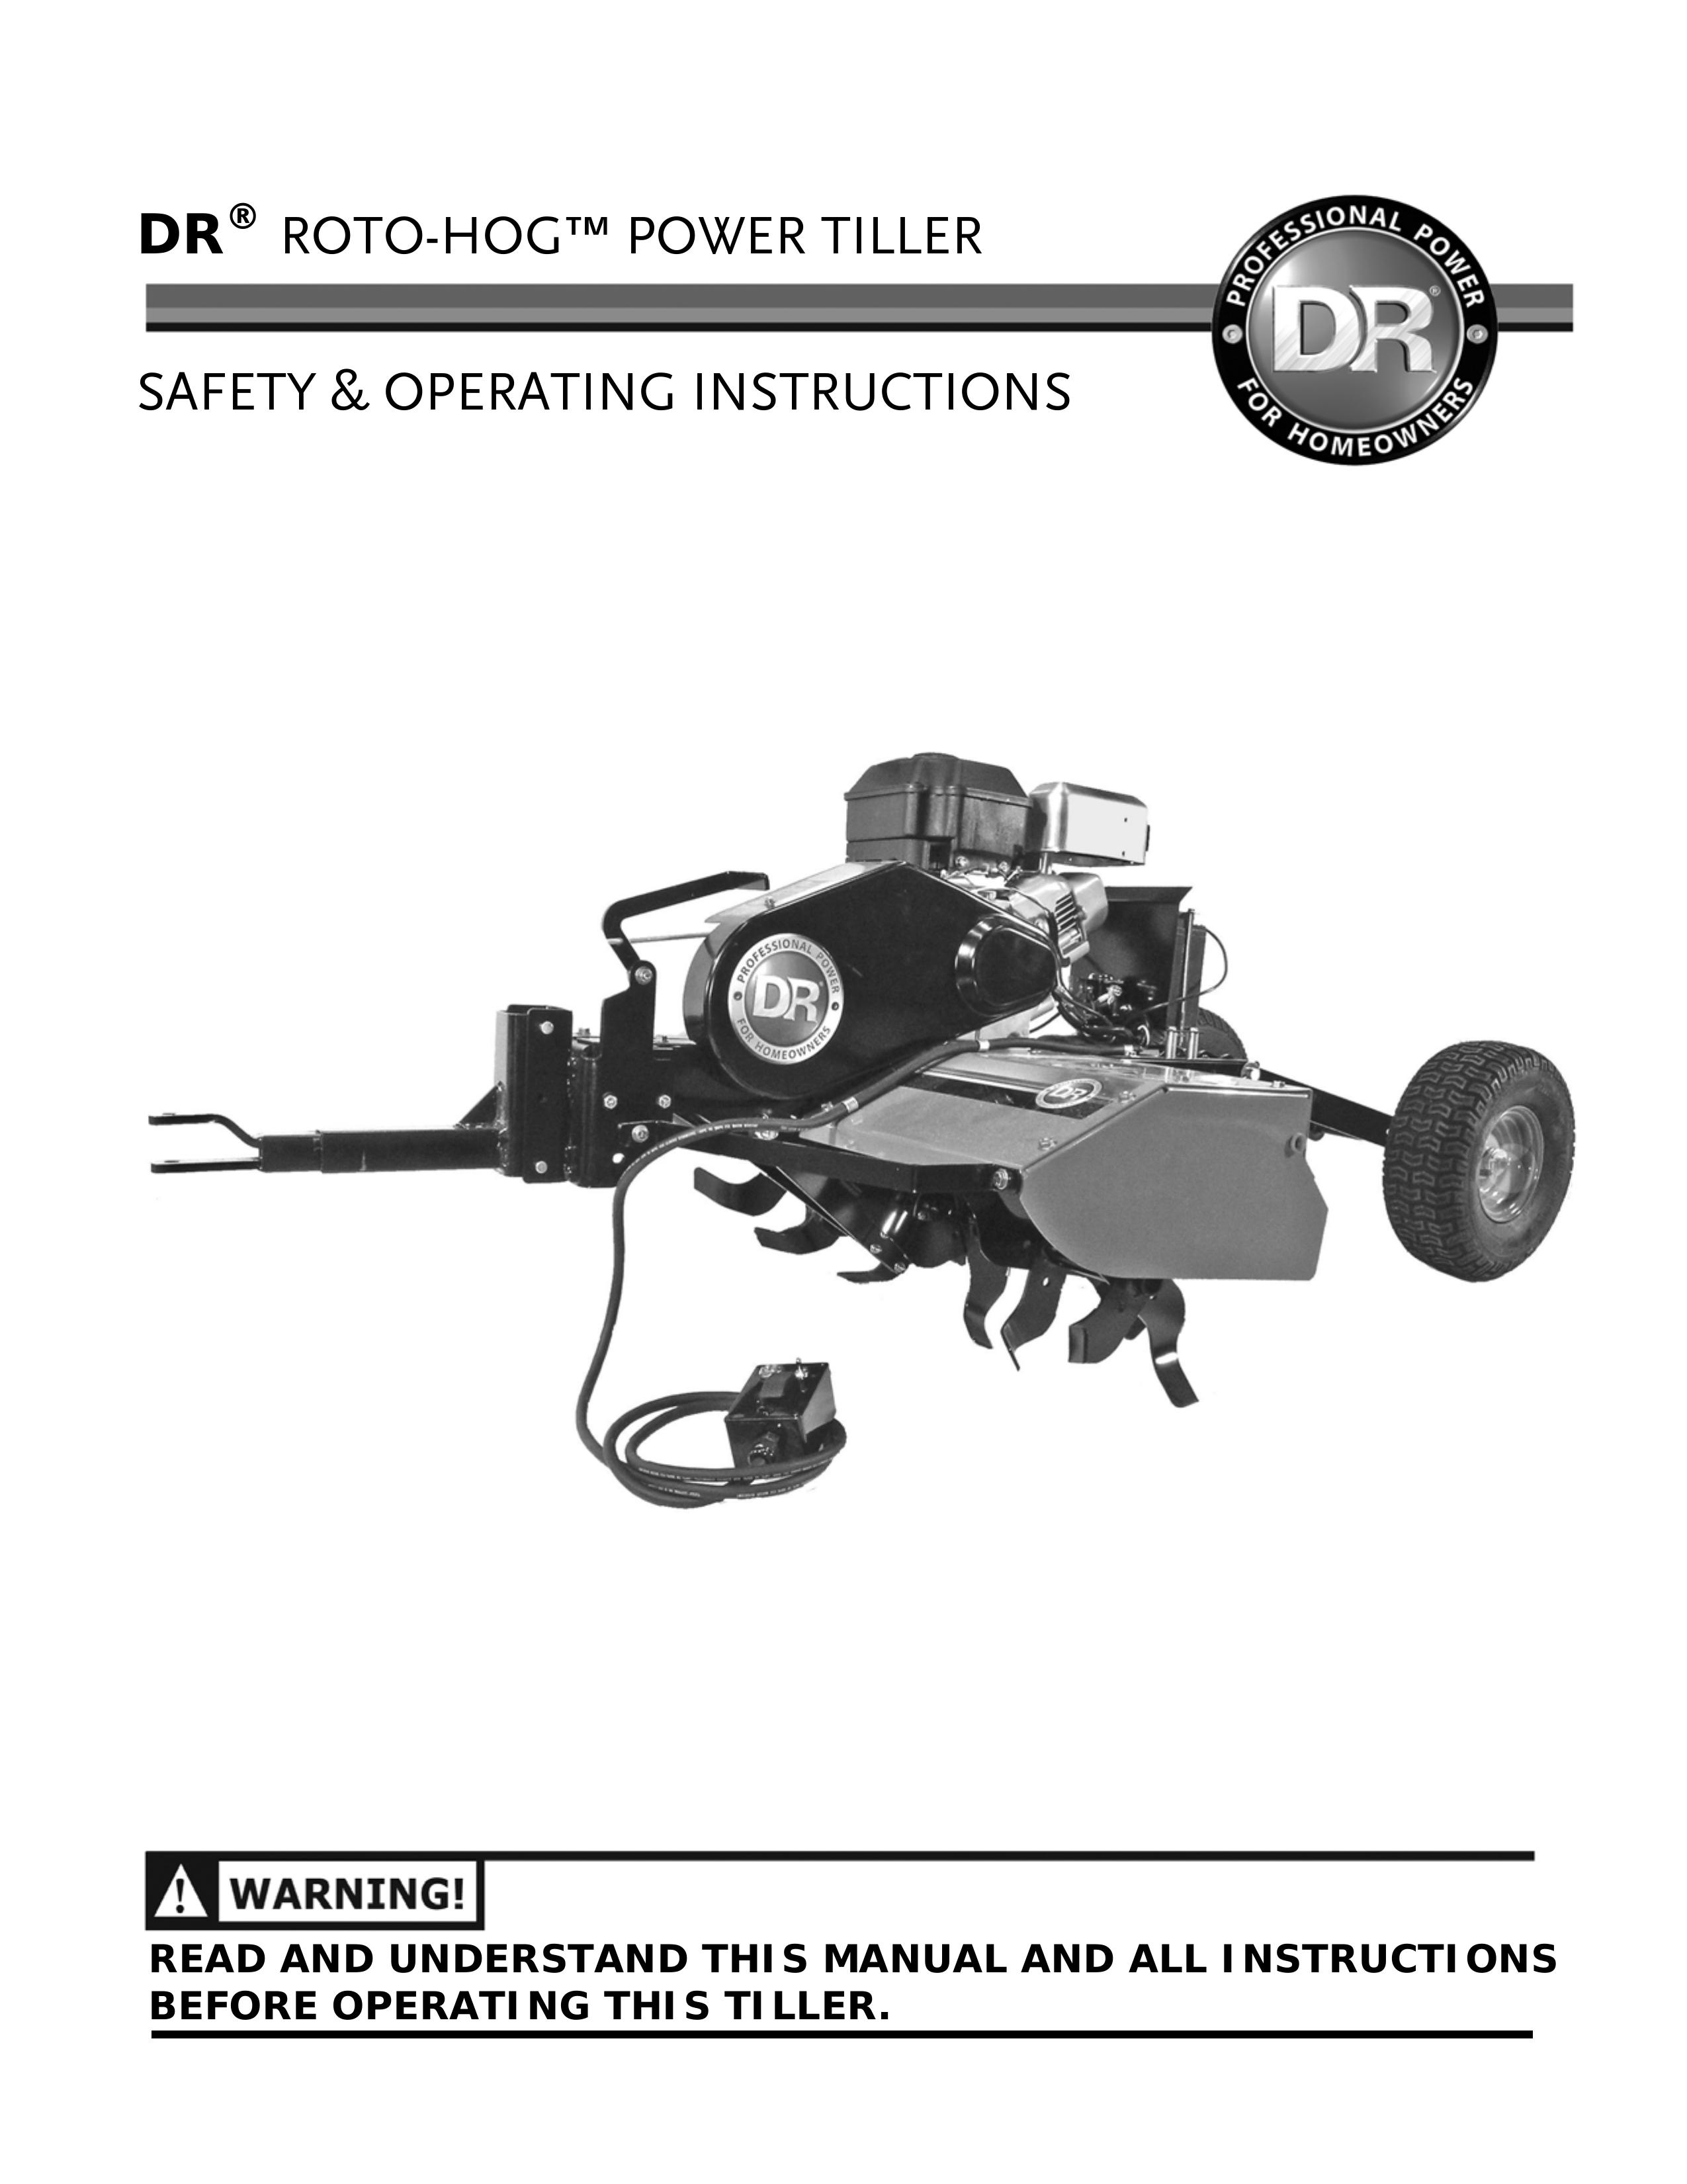 Country Home Products ROTO-HOGTM Tiller User Manual